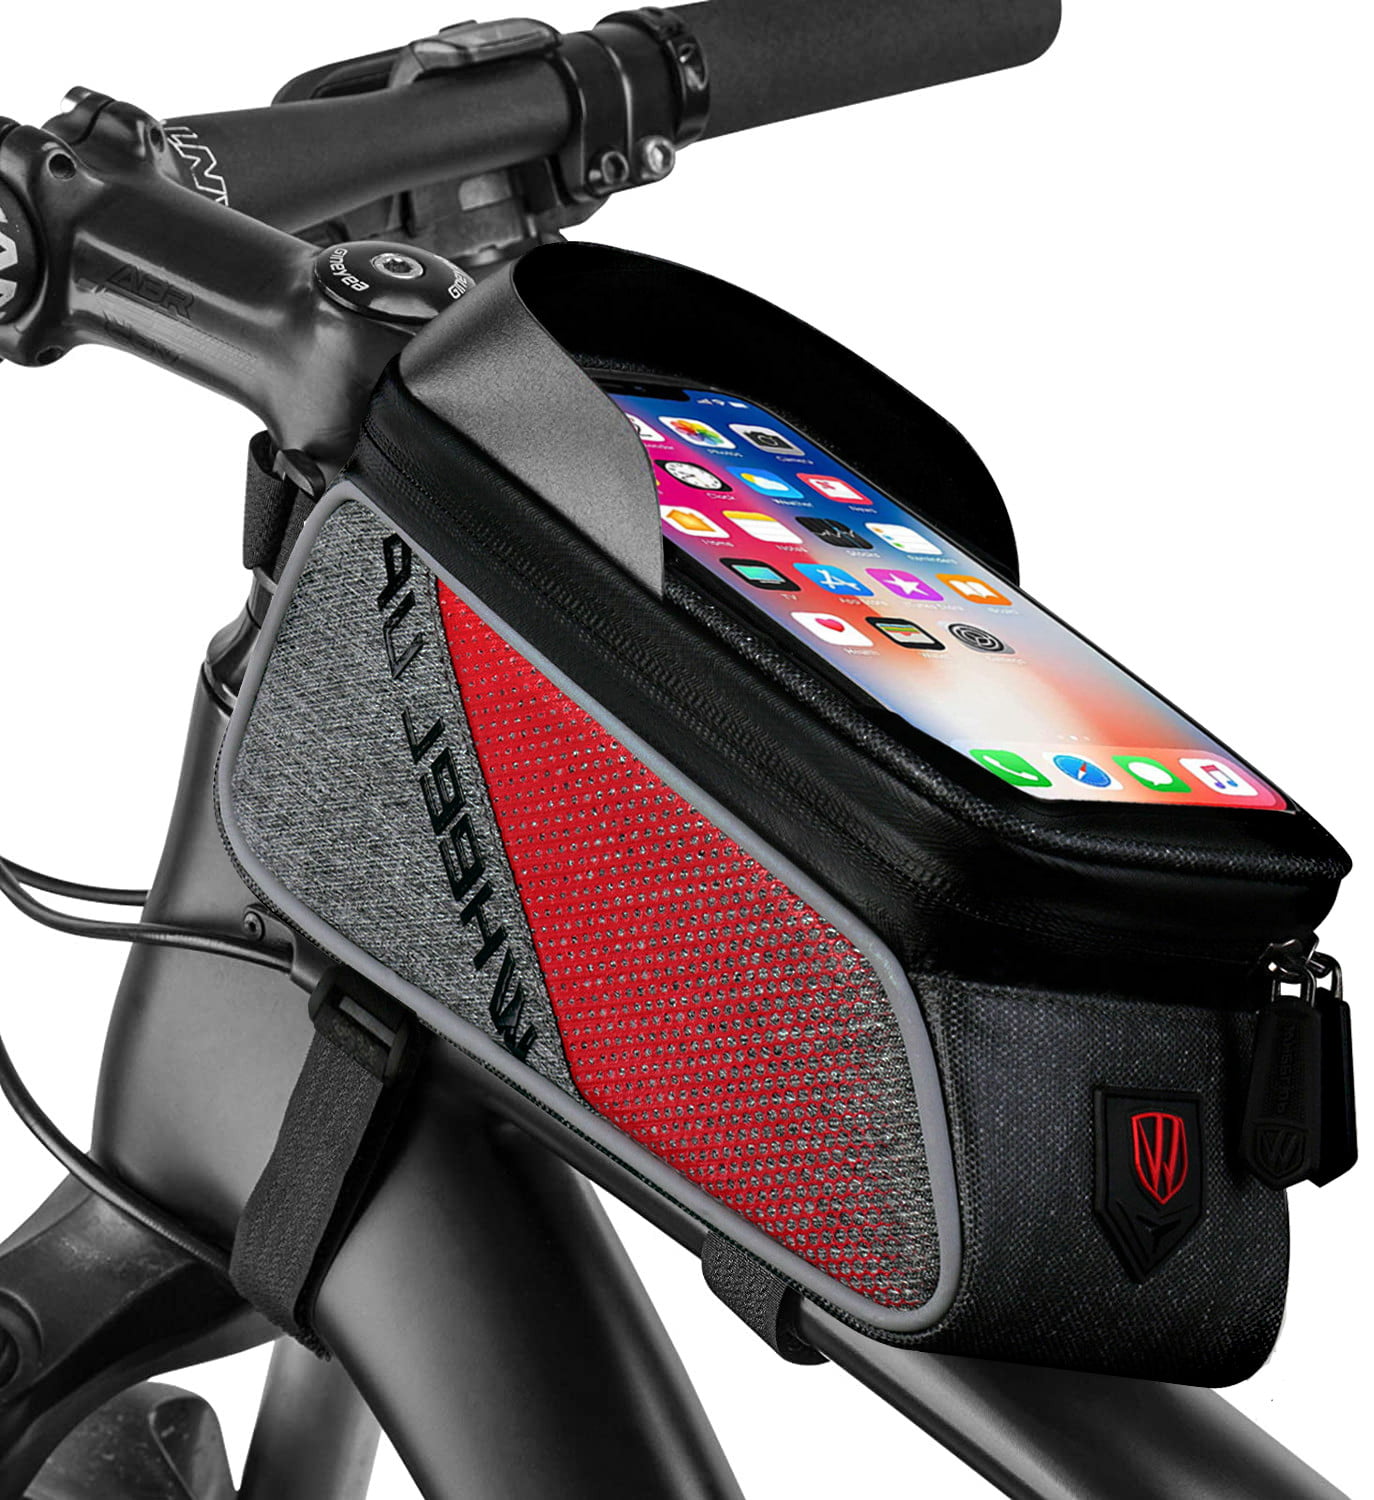 S8 Plus 6S 7 Plus Cupgo Bicycle Frame Bag Waterproof Mobile Phone Holder Bike Mount Top Tube Bag Suitable for iPhone X /8 Plus S8/S7 Edge Under 6.5 Inch Bicycle Bag Galaxy S9 Plus